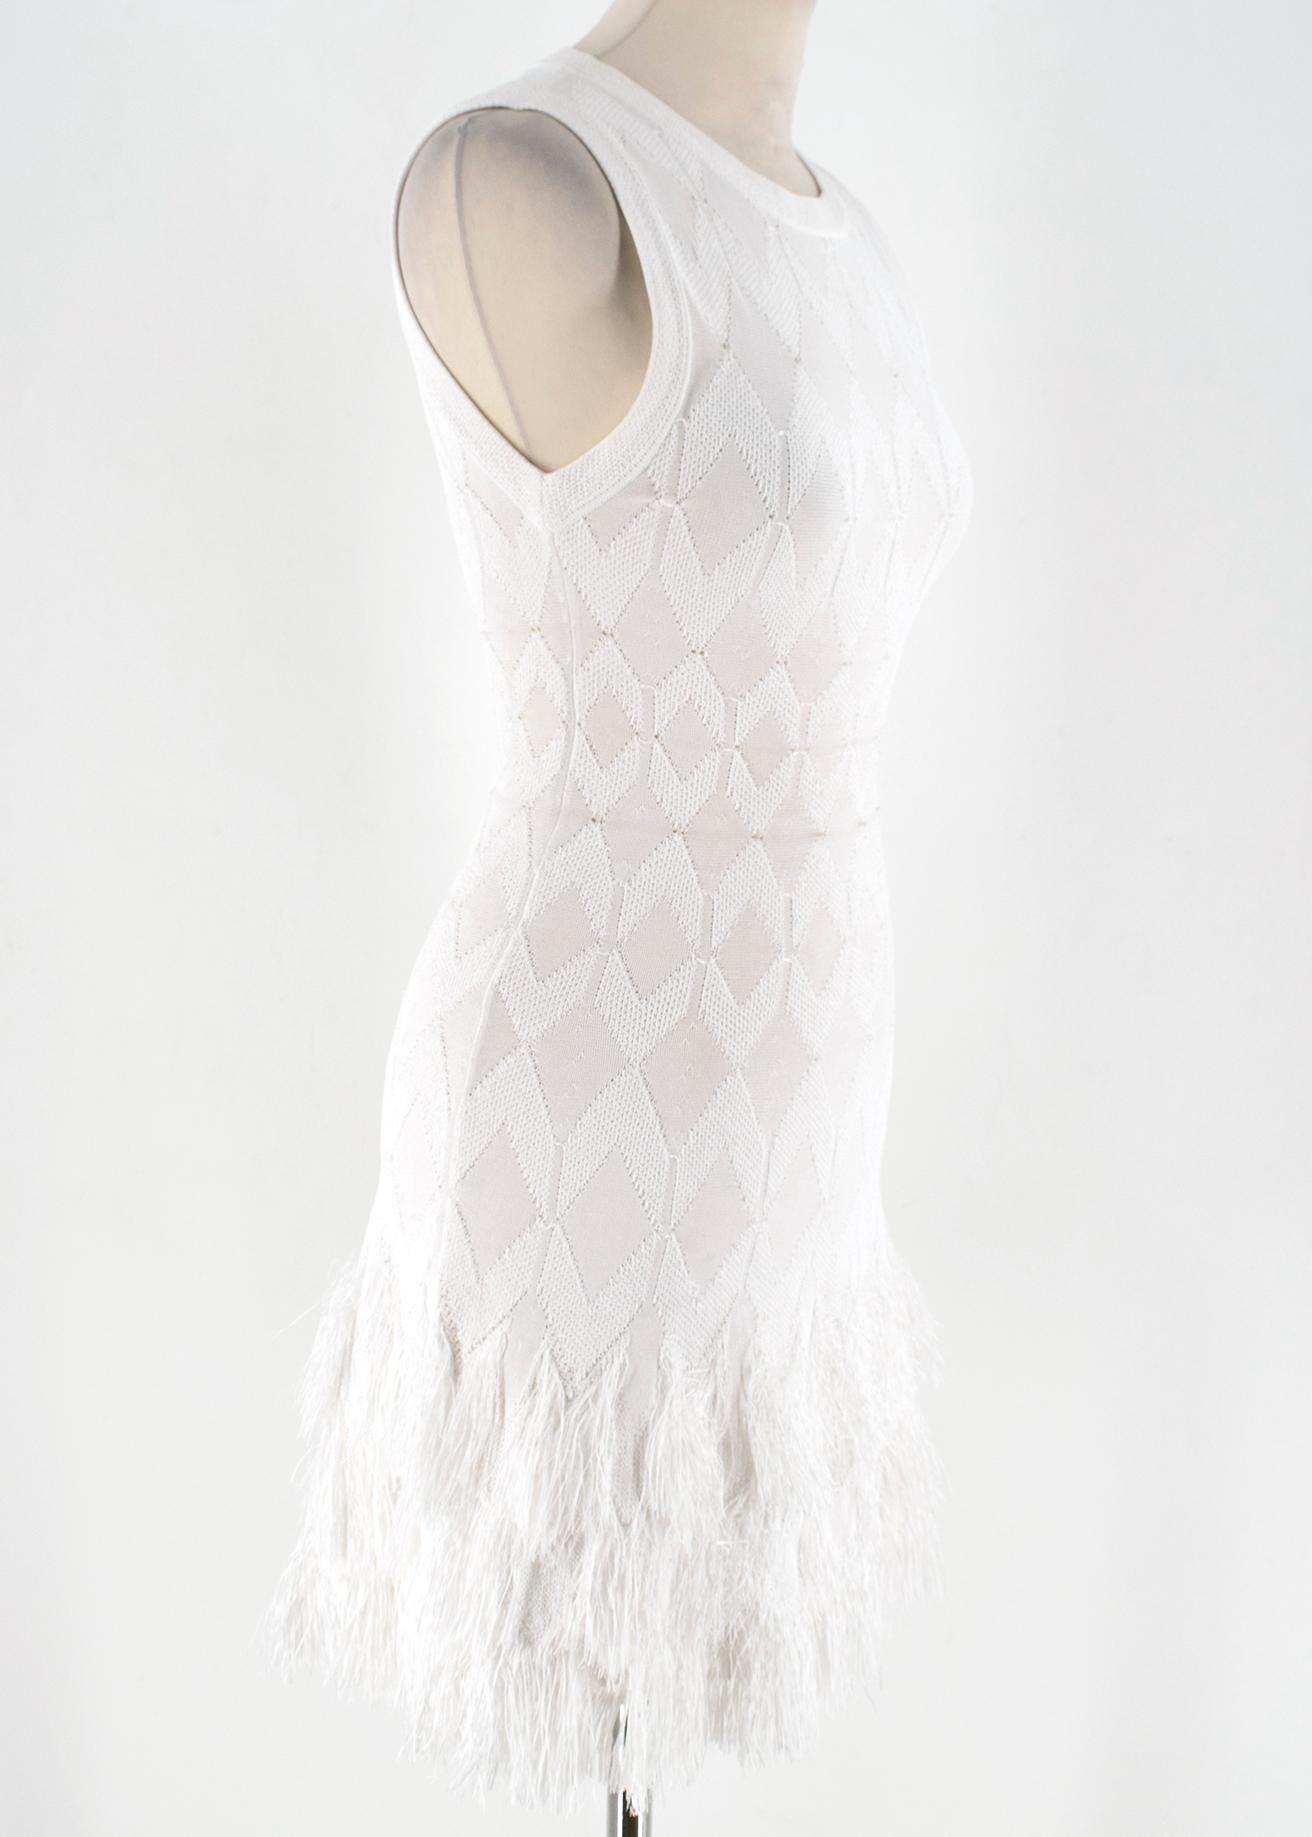 Alaia White Sleeveless Mini Dress 

Sleeveless white dress,
Round neck, 
Side zip fastening, 
Dramatic frayed hem design, 
Slight stretch material,
Lightweight 


Please note, these items are pre-owned and may show some signs of storage, even when